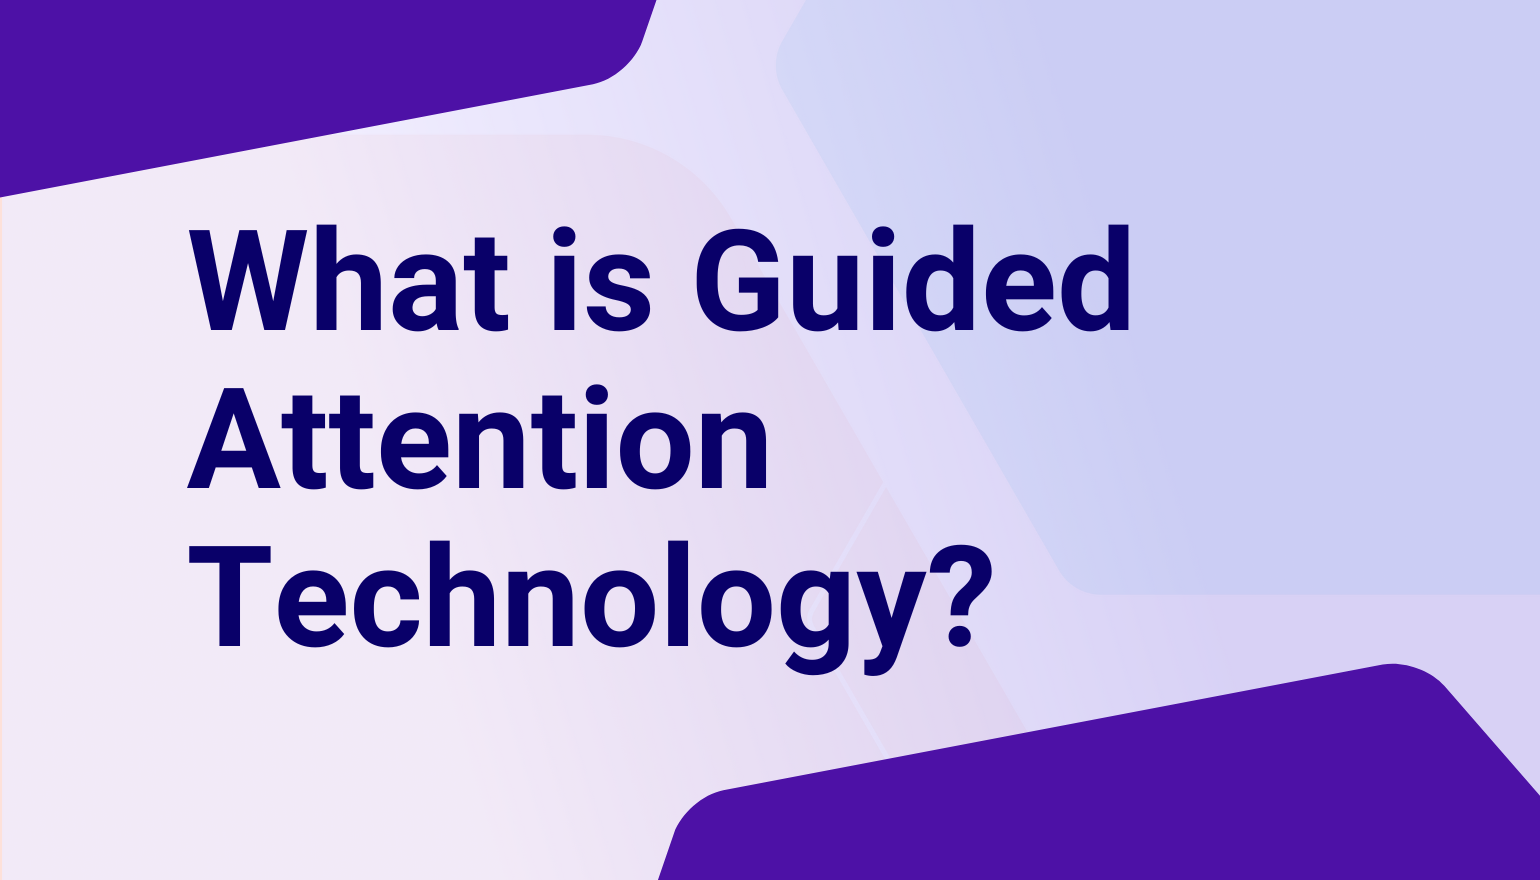 What is Guided Attention Technology?